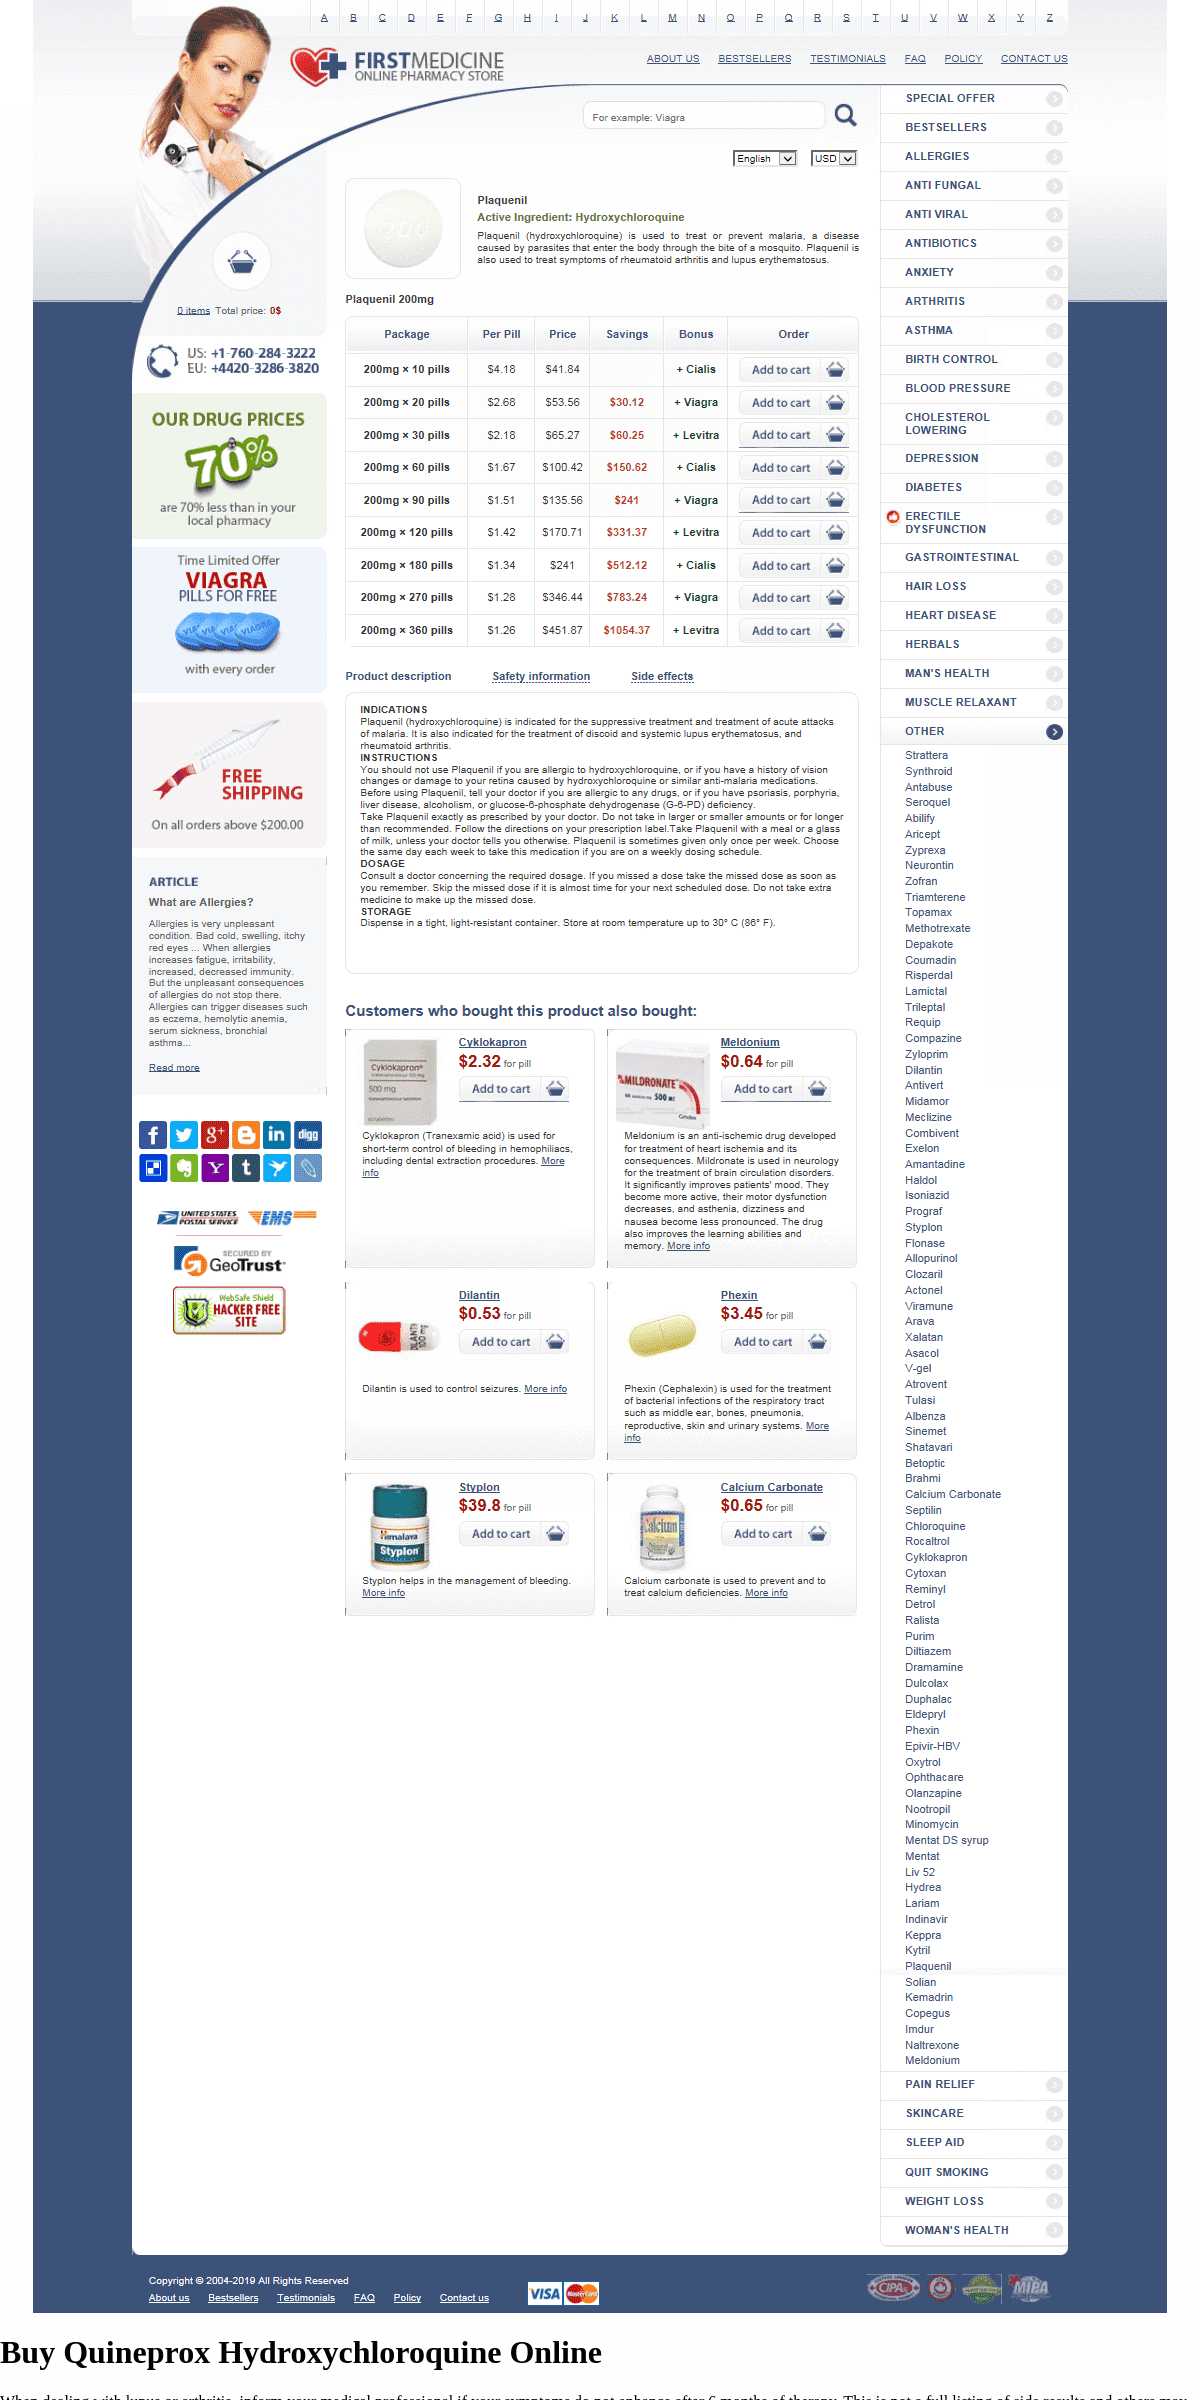 A complete backup of quineprox.com